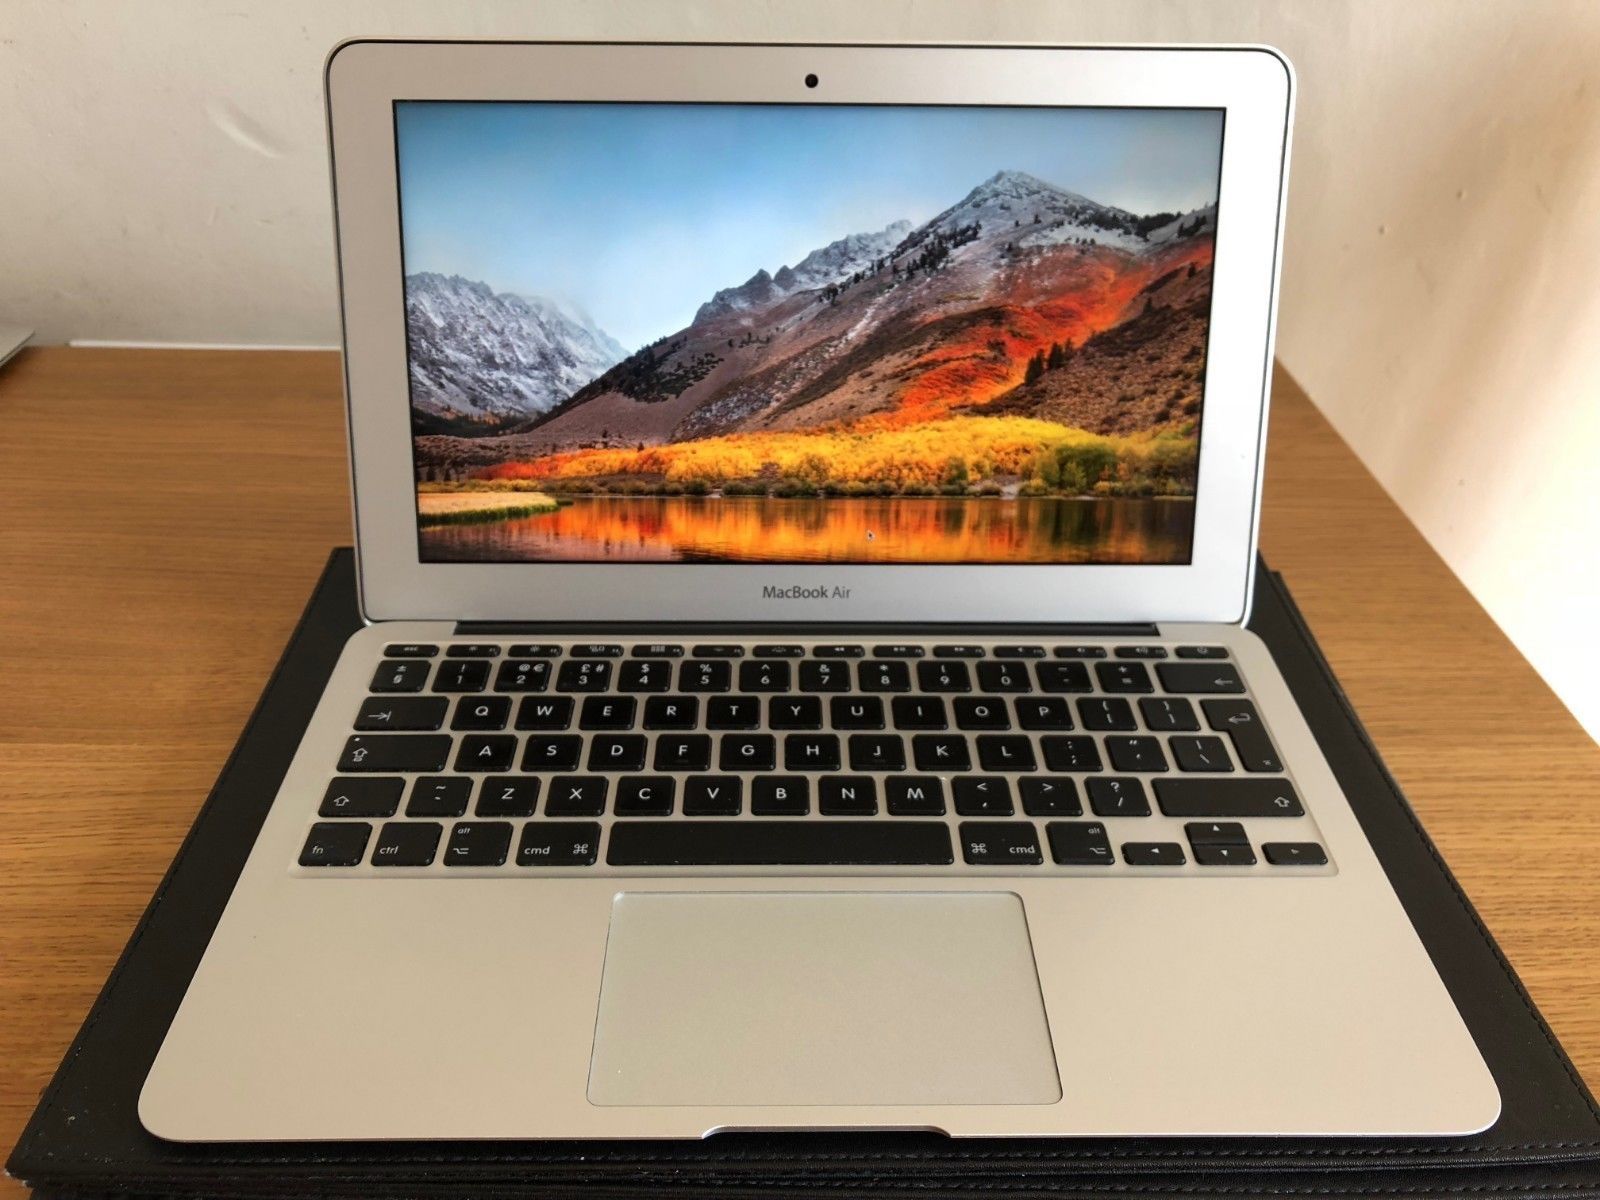 Apple MacBook Air 11", 1.4 GHz Core i5, 4GB Ram, 128 GB SSD, 2014 perfect condition